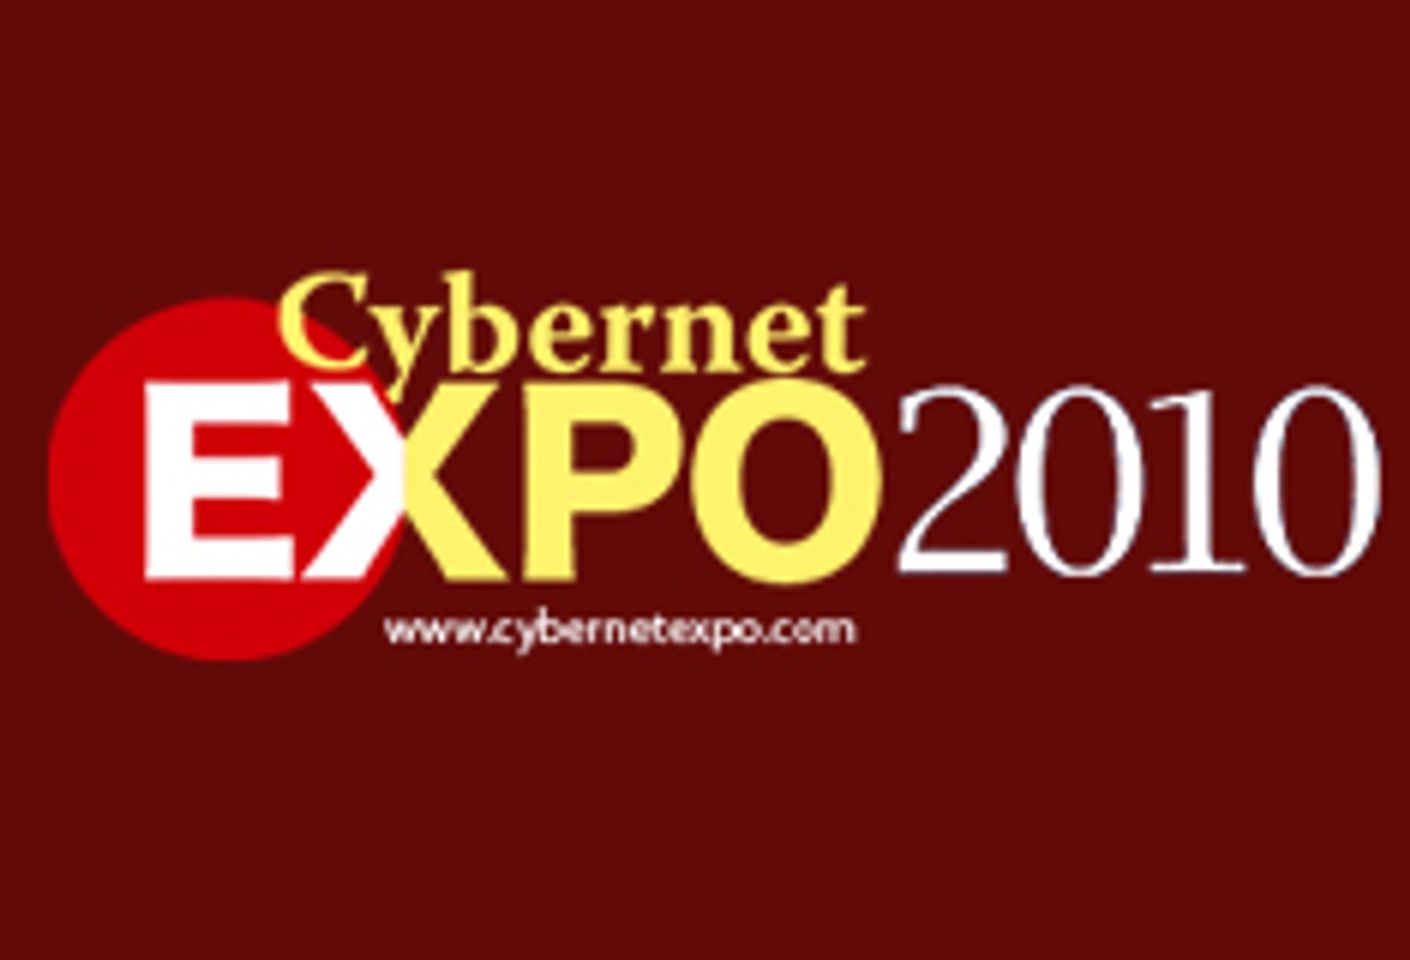 Cybernet Expo Opens Early-Bird Registration; Launches New Website for 2010 Show in San Francisco